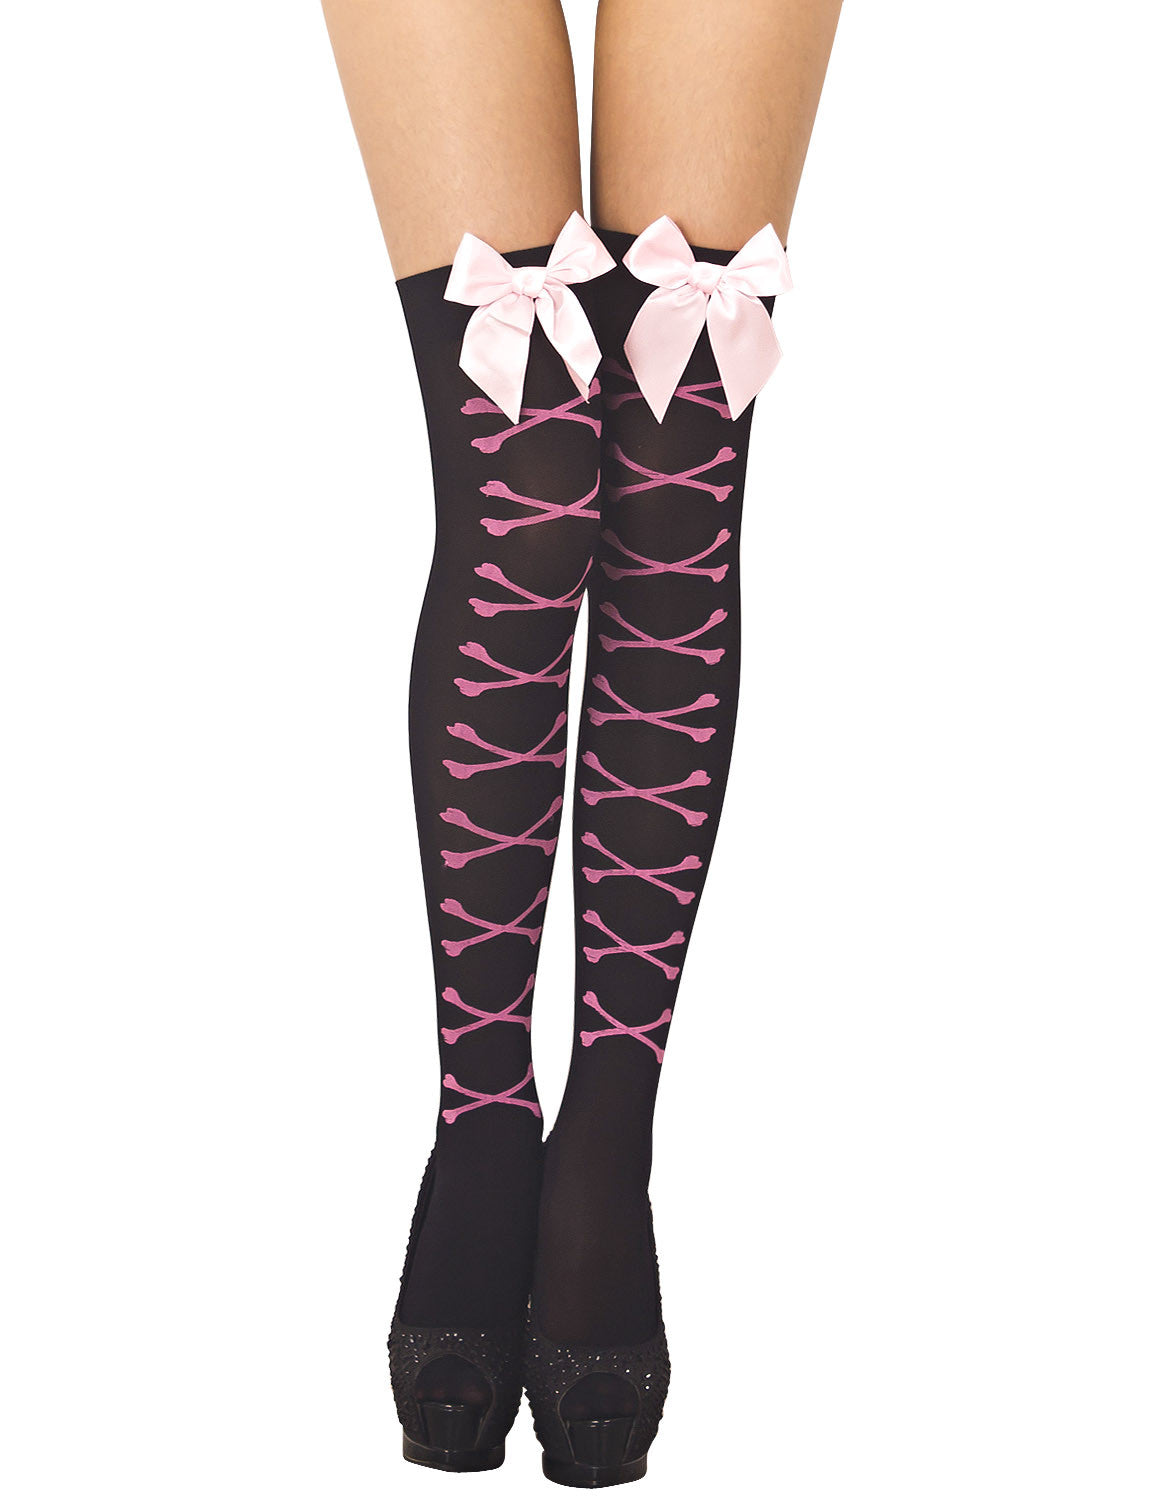 Women's Bones Tied Up Patterned Seamless Punk Thigh High Hold-up Stockings